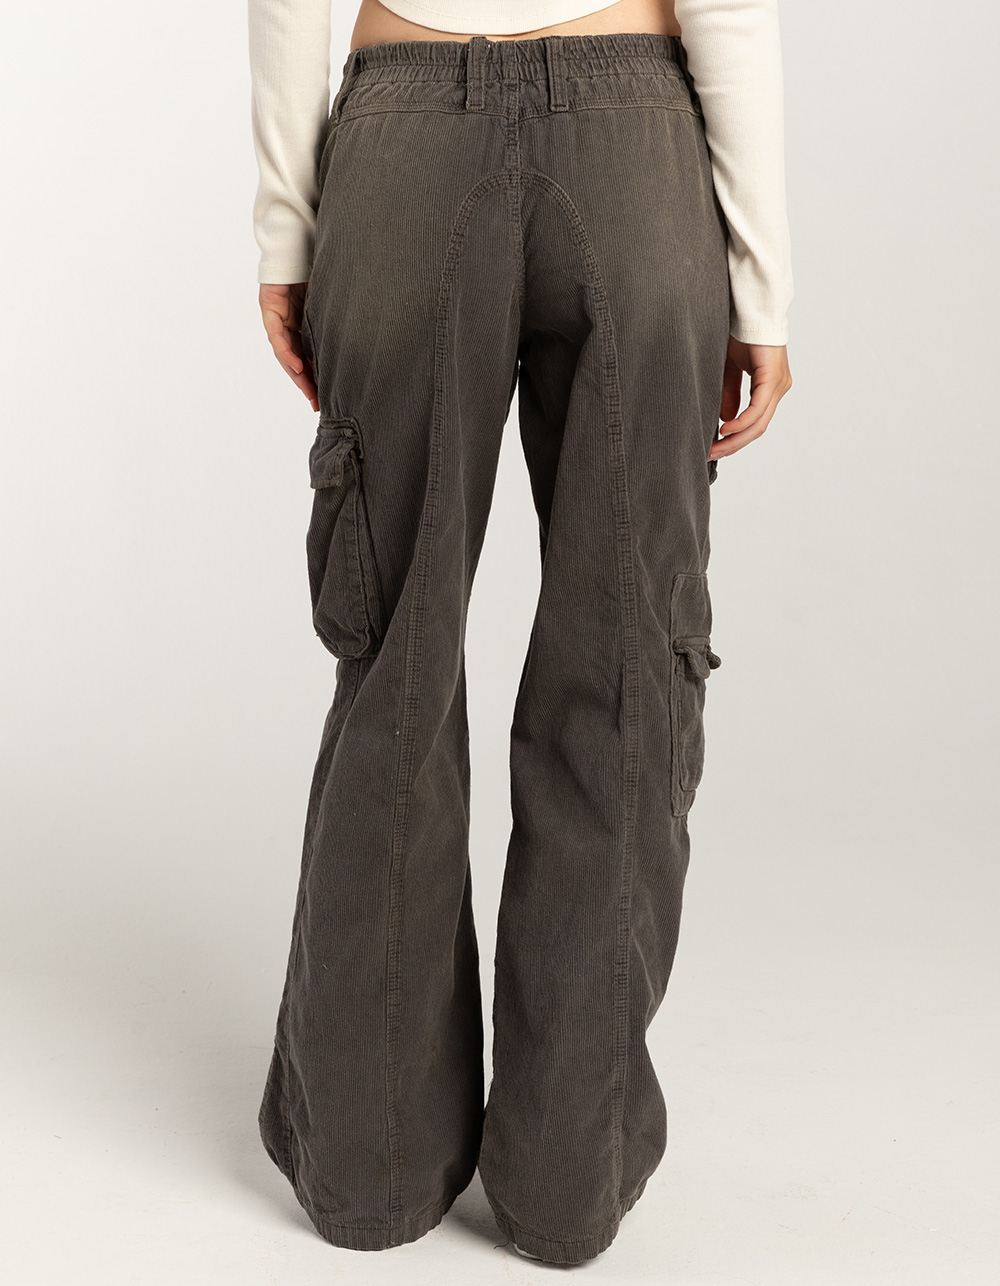 Urban - Tillys | Corduroy Mid Cargo Y2K Womens BDG Outfitters Pants CHARCOAL Rise